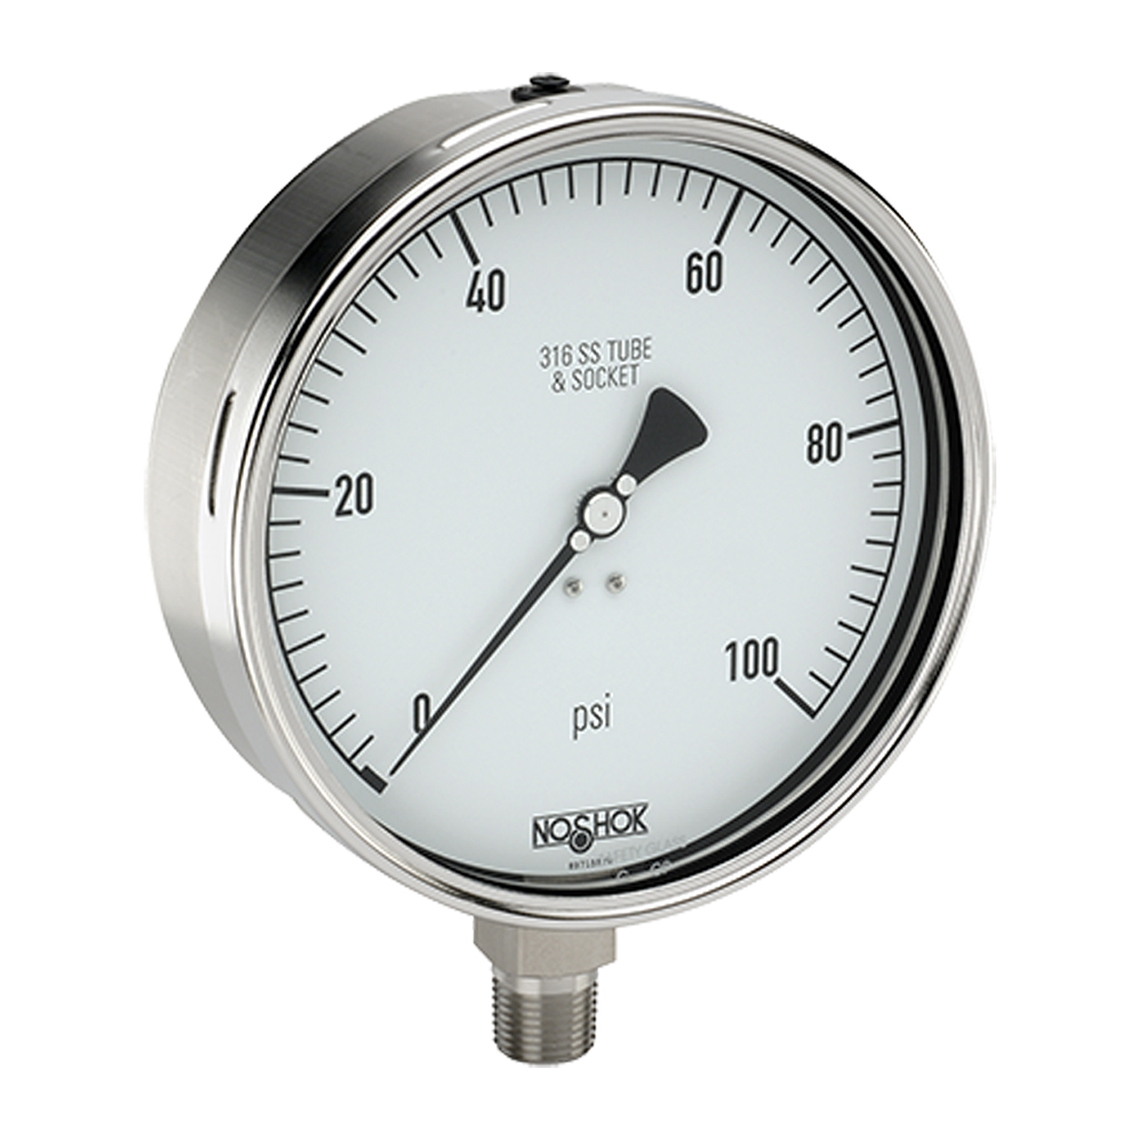 60-400-2000-psi/kPa 400/500 Series All Stainless Steel Dry and Liquid Filled Pressure Gauges